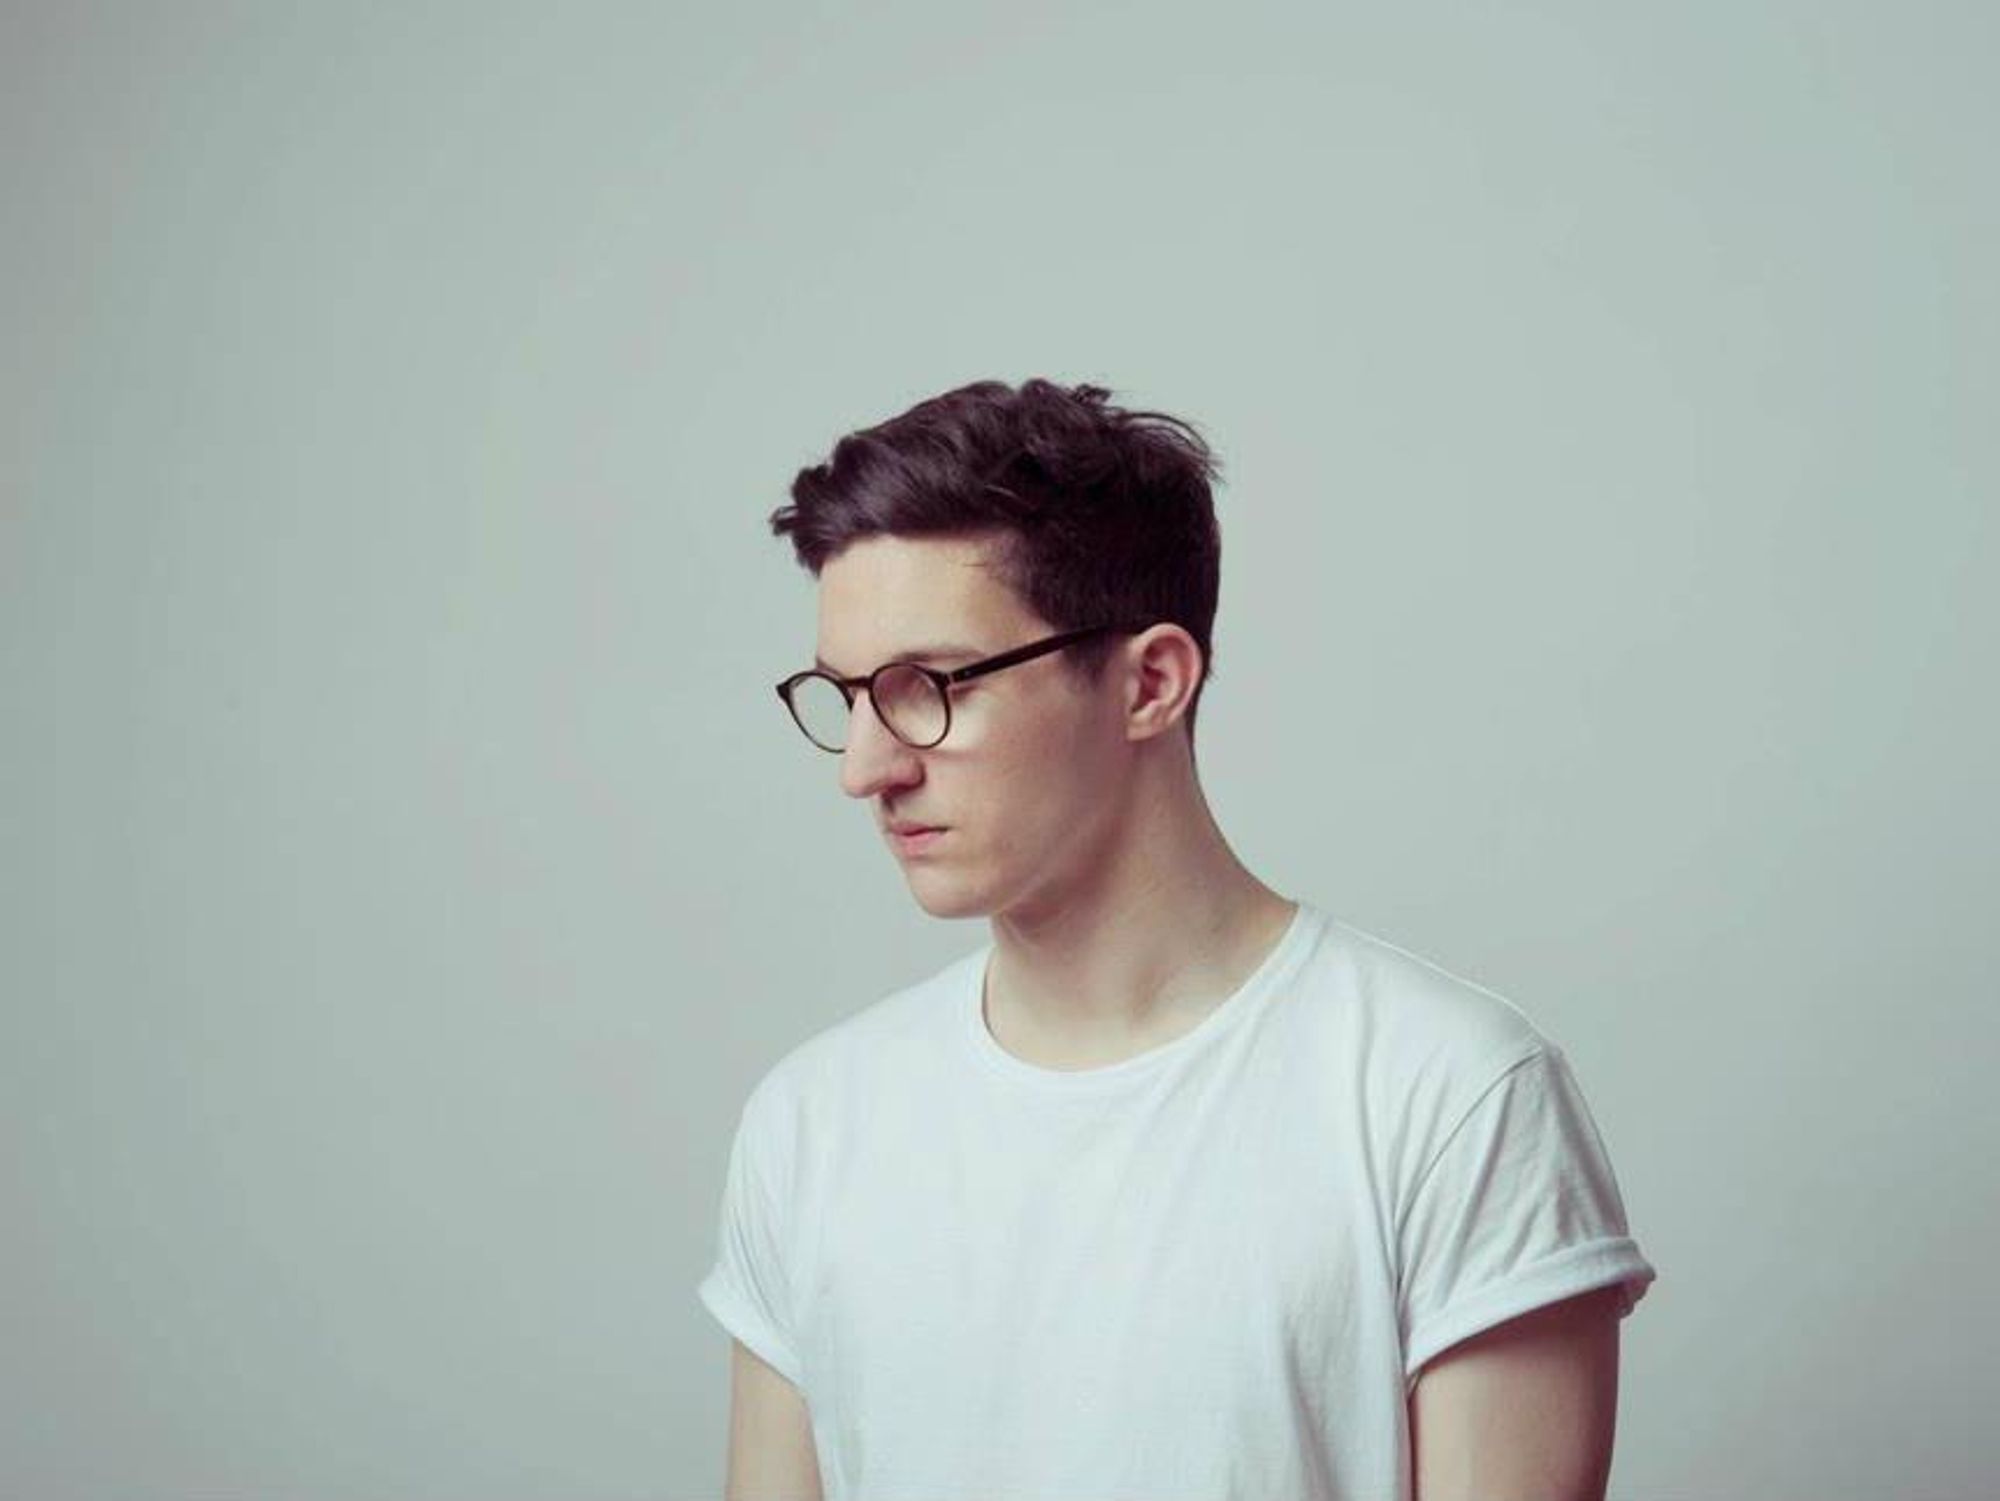 Dan Croll is among the up-and-comers from overseas making waves at this year's ACL Fest.